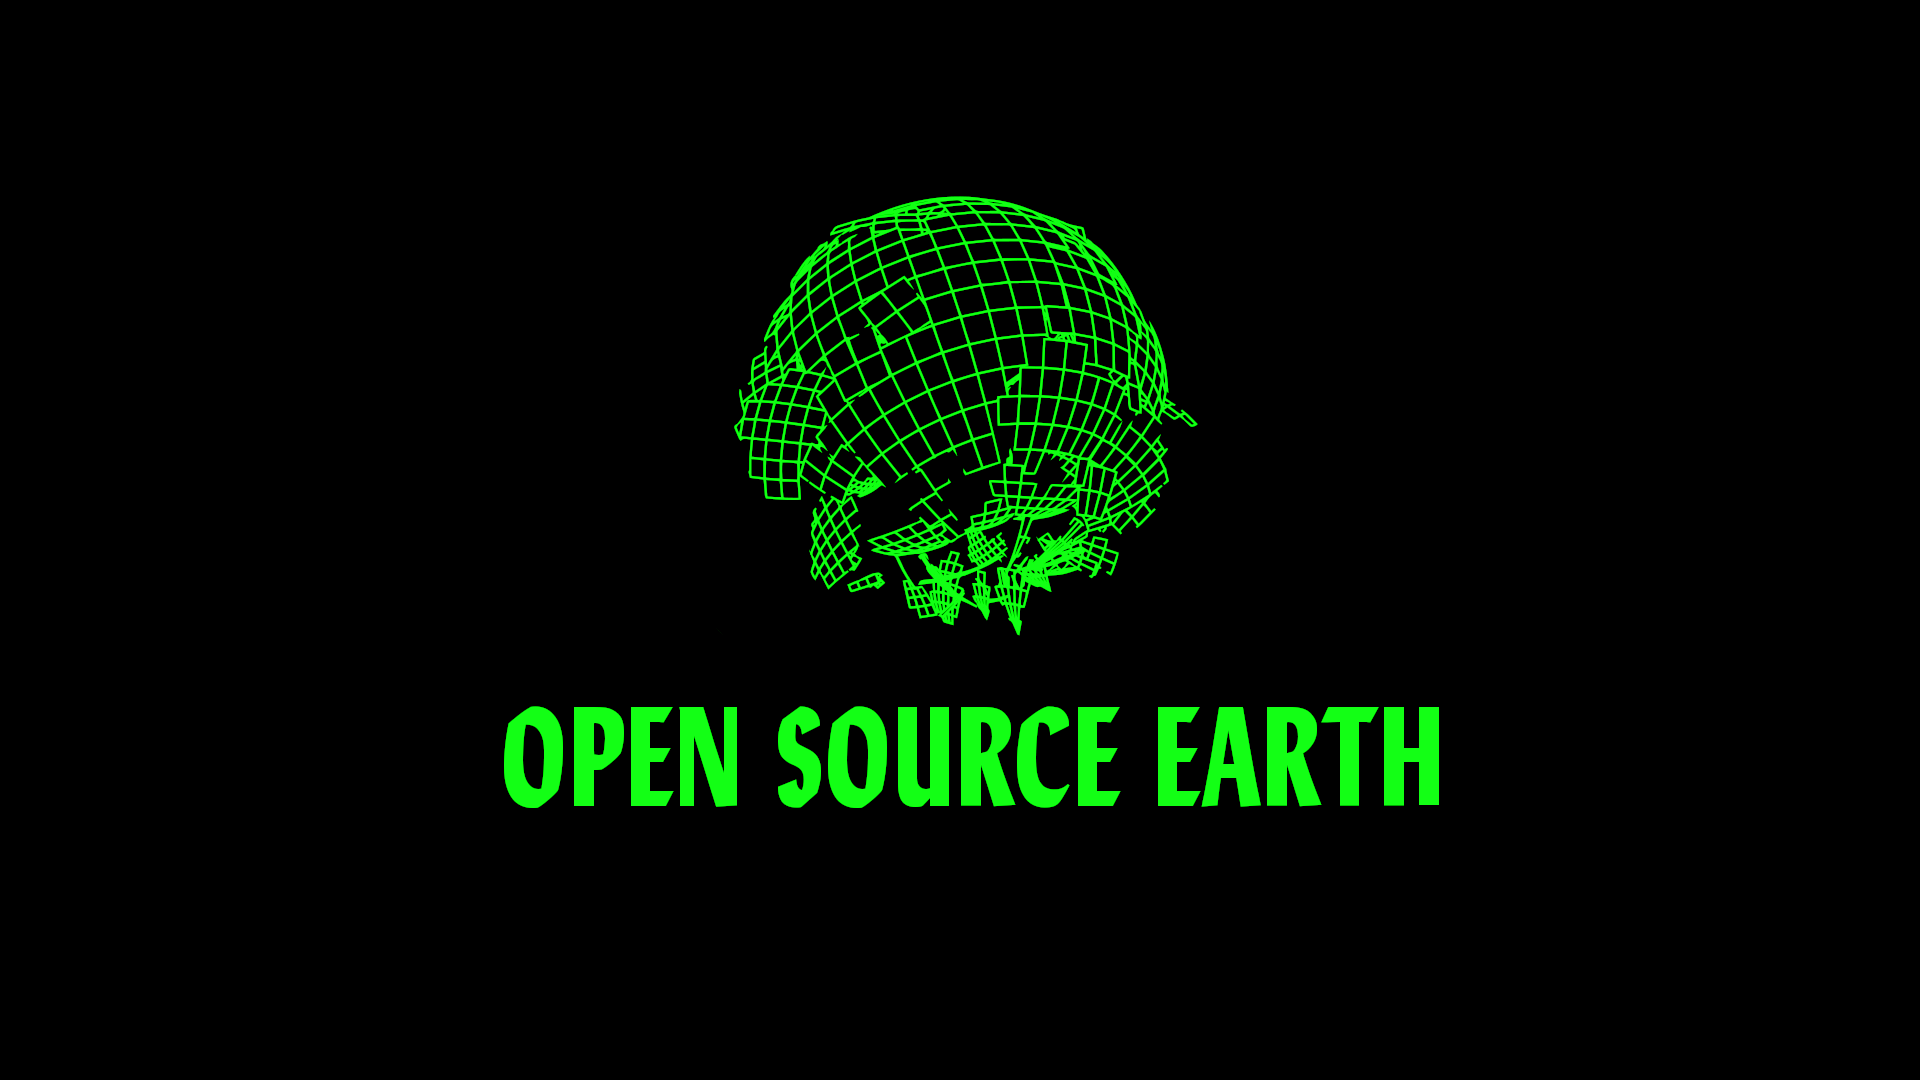 General 1920x1080 technology minimalism open source grid sphere simple background green black background